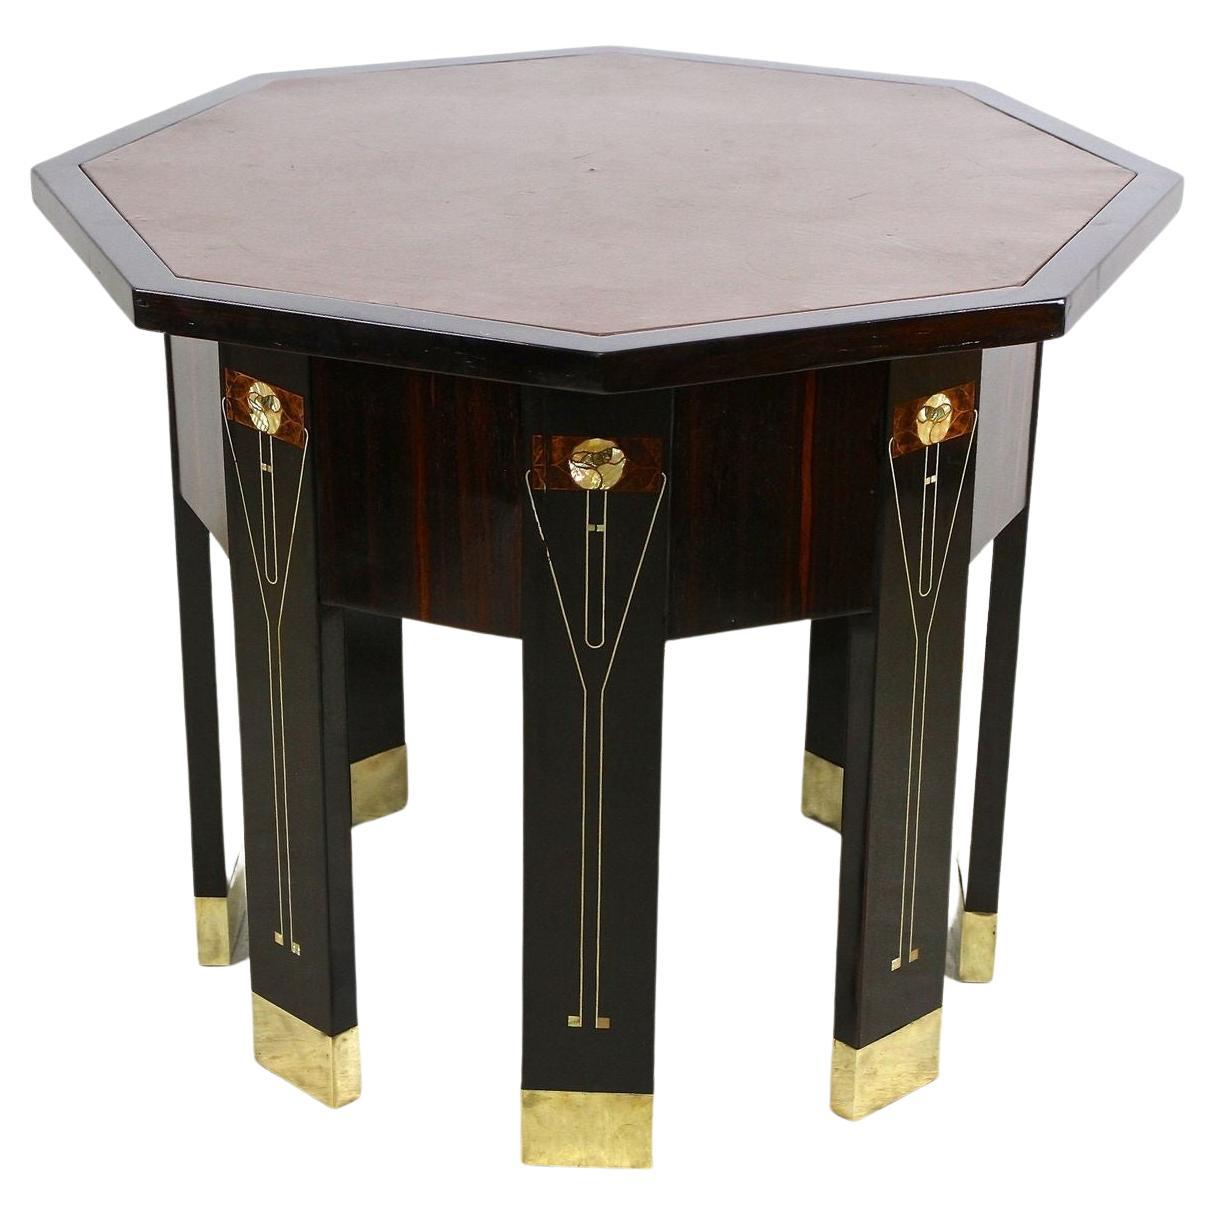 Art Nouveau Octagonal Palisander Table with Mother of Pearl Inlays, AT ca. 1905 For Sale